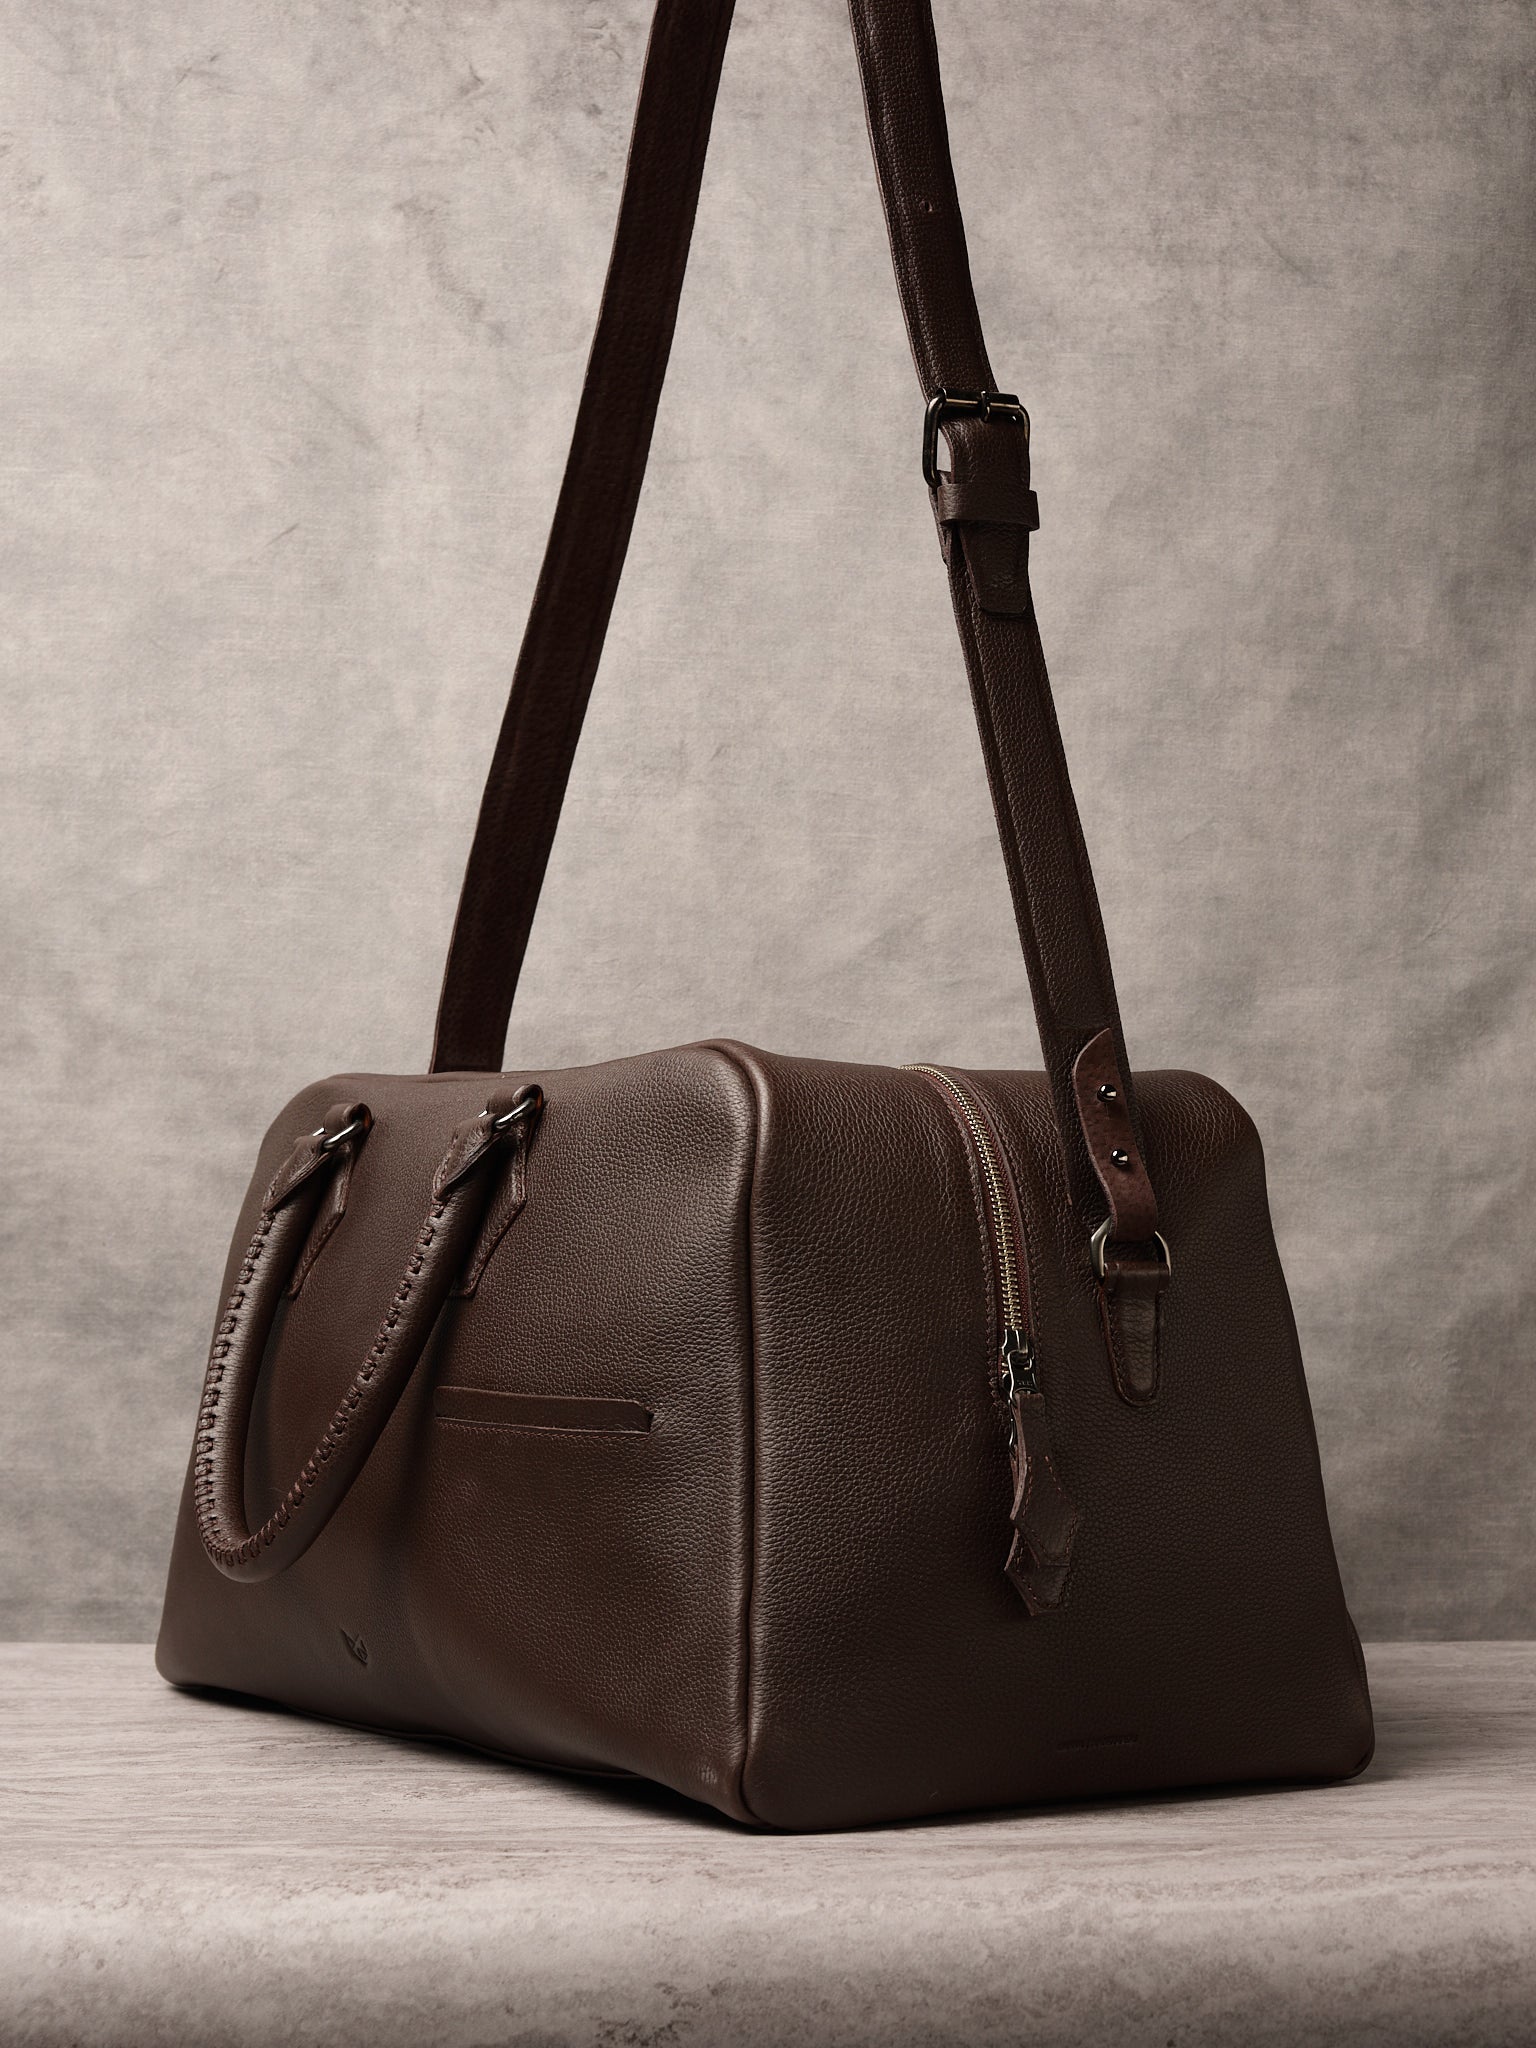 Trapezoid Silhouette Bag. Mens Leather Duffle Bag Dark Brown by Capra Leather